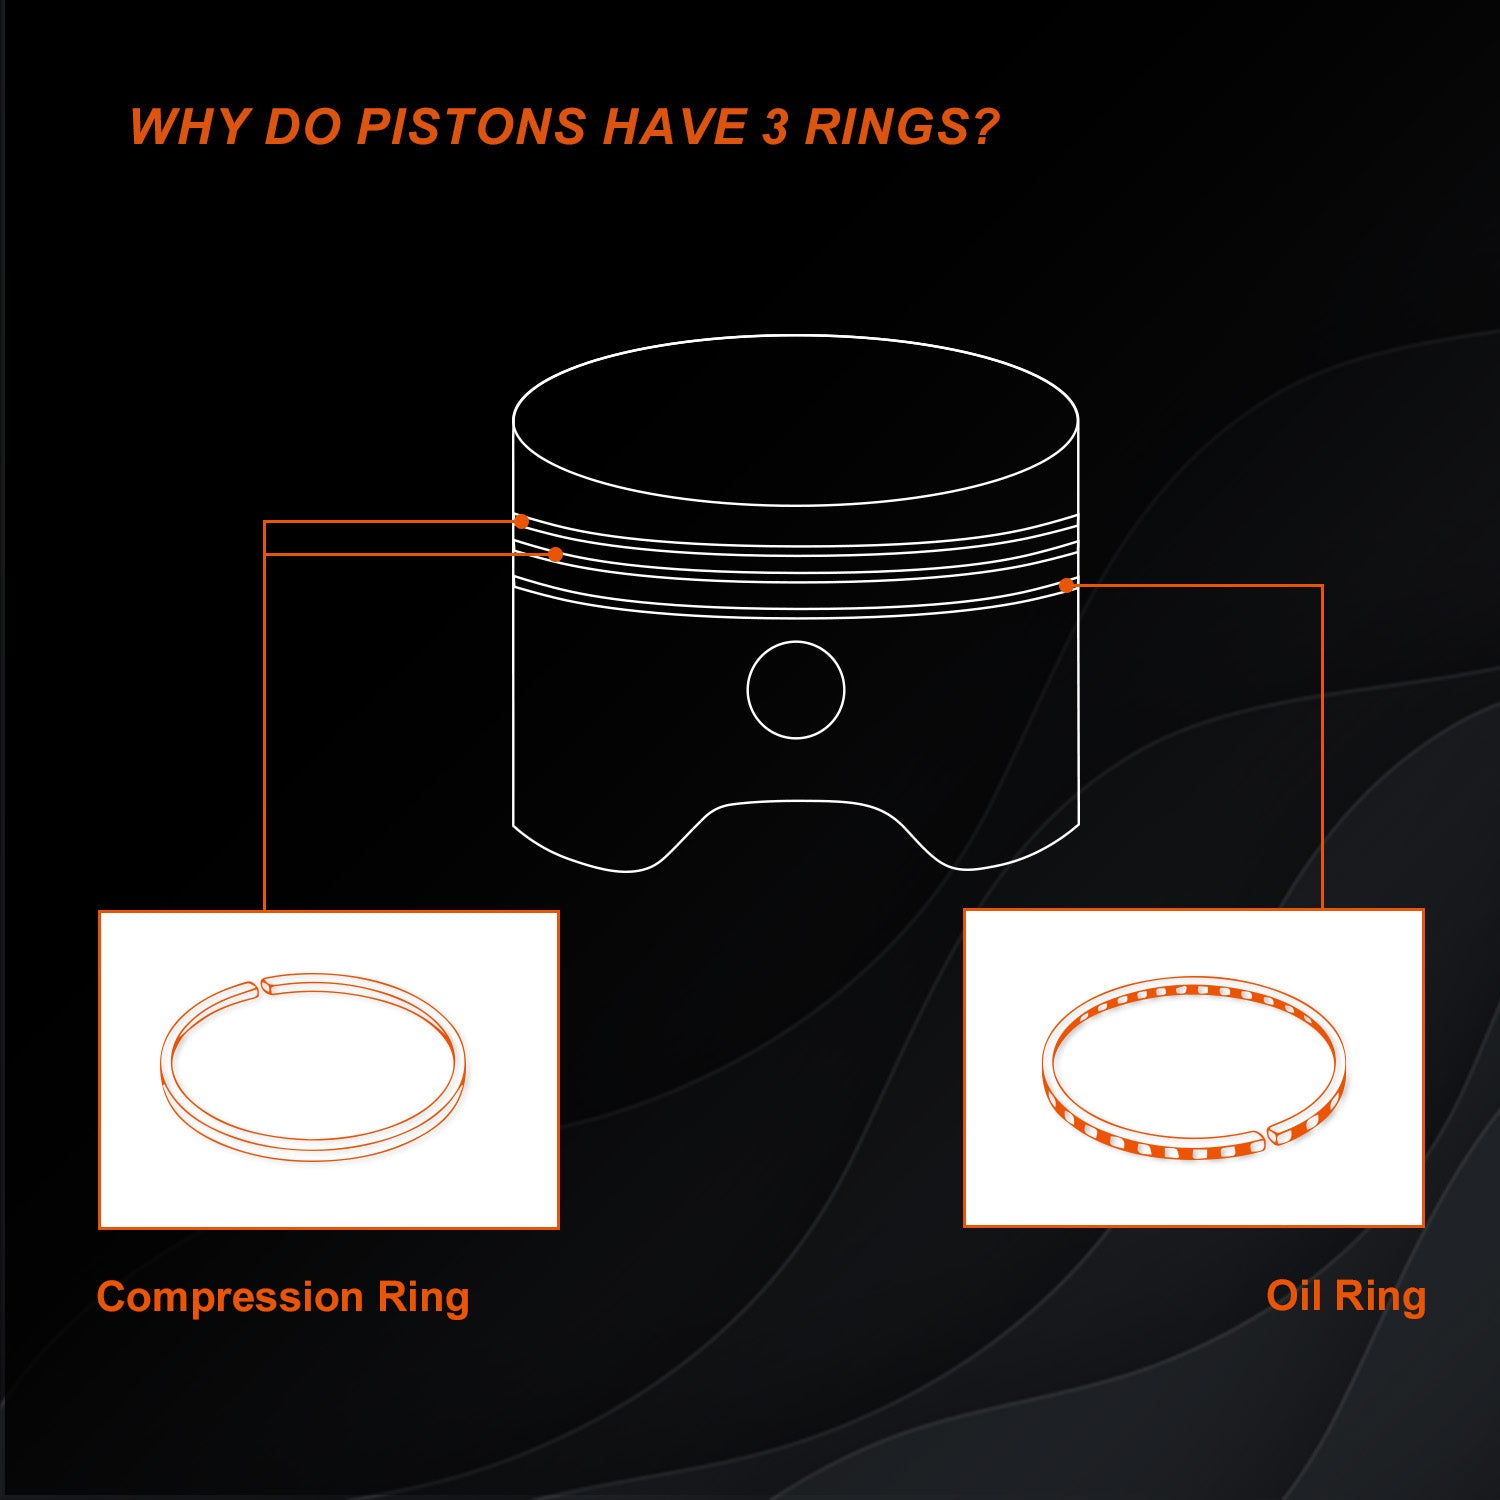 Why do pistons have 3 rings?